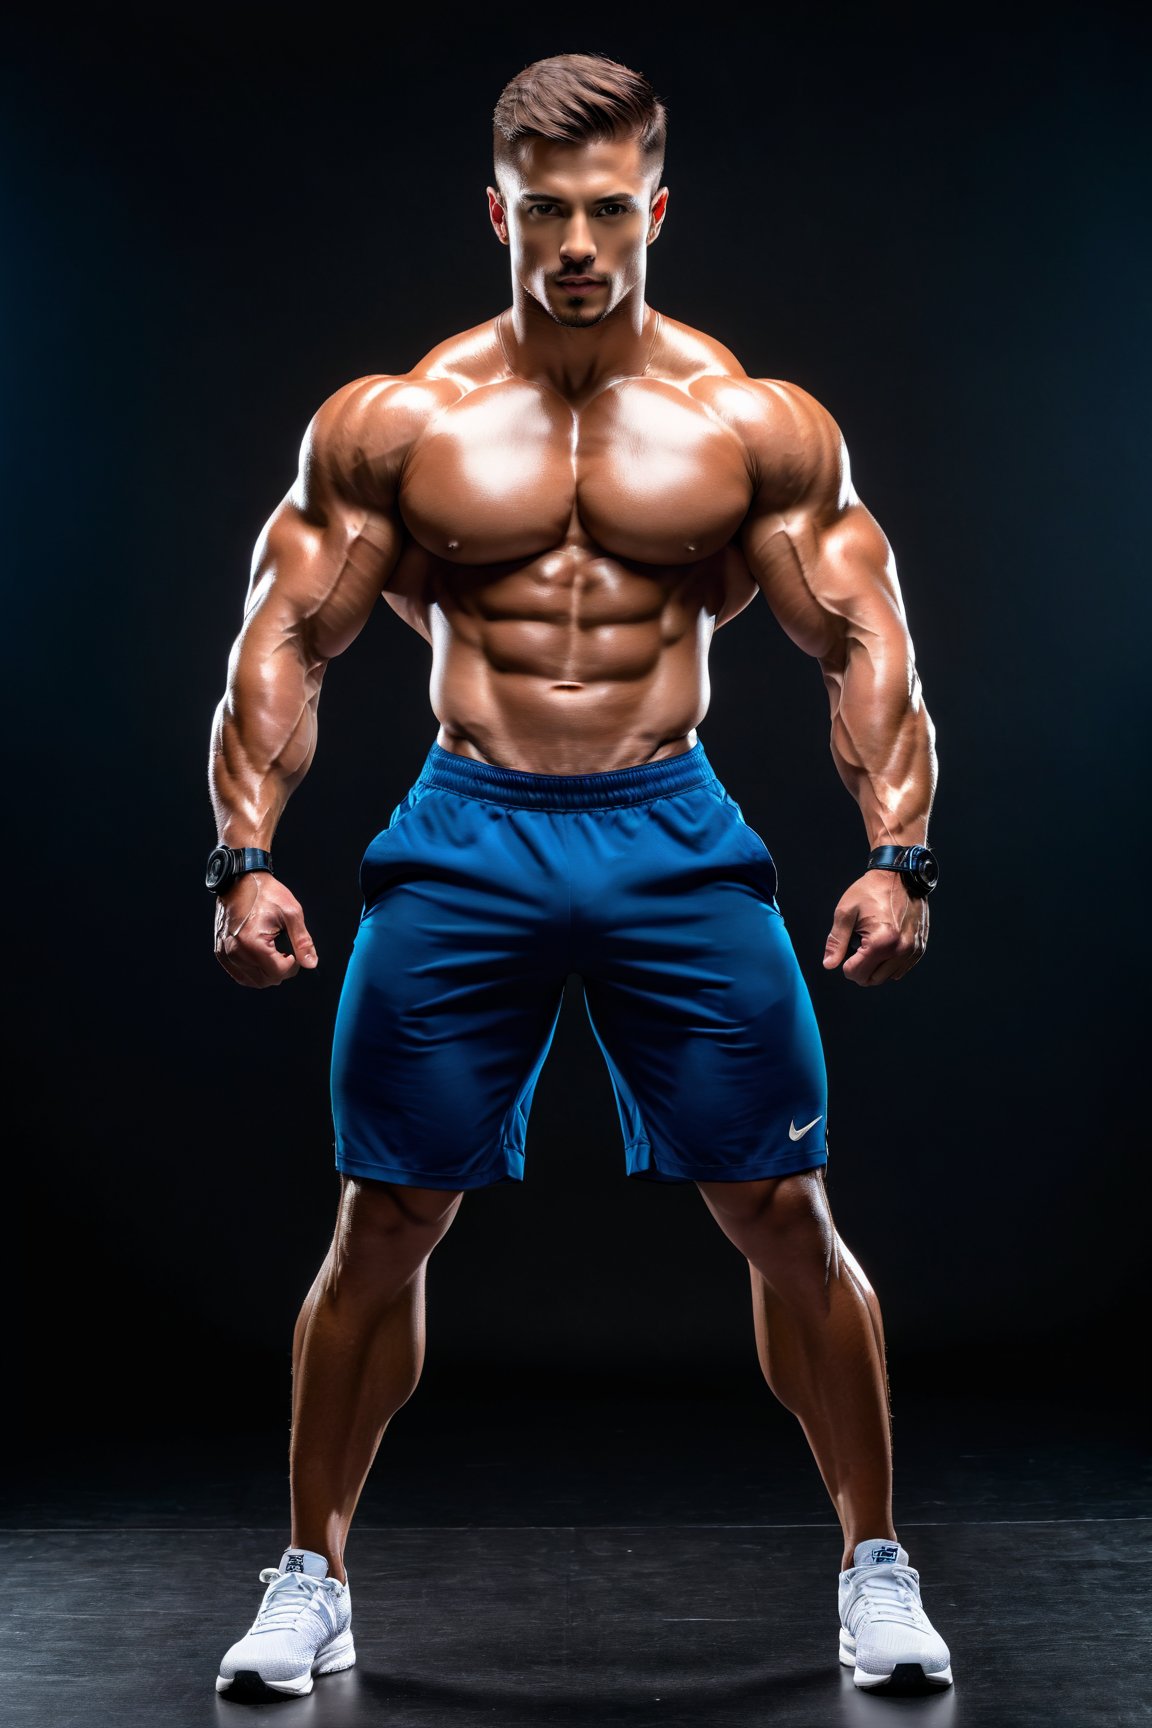 (best quality,4k,8k,highres,masterpiece:1.2),ultra-detailed,(realistic,photorealistic,photo-realistic:1.37),athletic build,toned muscles,excellent physique,strong physique,muscular arms and abs,well-defined muscles,impressive body composition,fit and healthy appearance,strong and powerful body,fluid and dynamic figure,energetic and active posture,strong presence and confidence,striking and captivating gaze,sharp focus on the subject,intense lighting and shadows,incredible attention to detail,detailed textures and contours,strategic lighting and composition,realistic skin tone and texture,life-like facial features,expressive eyes and facial expressions,perfectly proportioned body,believable and life-like appearance,impeccable anatomy and form,exquisite attention to muscle definition,natural and realistic poses,tension and energy captured in the movement,picturesque background with scenic elements,dynamic and vivid colors,emphasize the strength and power of the physique,professional fitness photography style,showcasing the athletic body in its full glory,appealing and arresting composition,legendary and iconic postures,exuding strength, confidence, and determination.